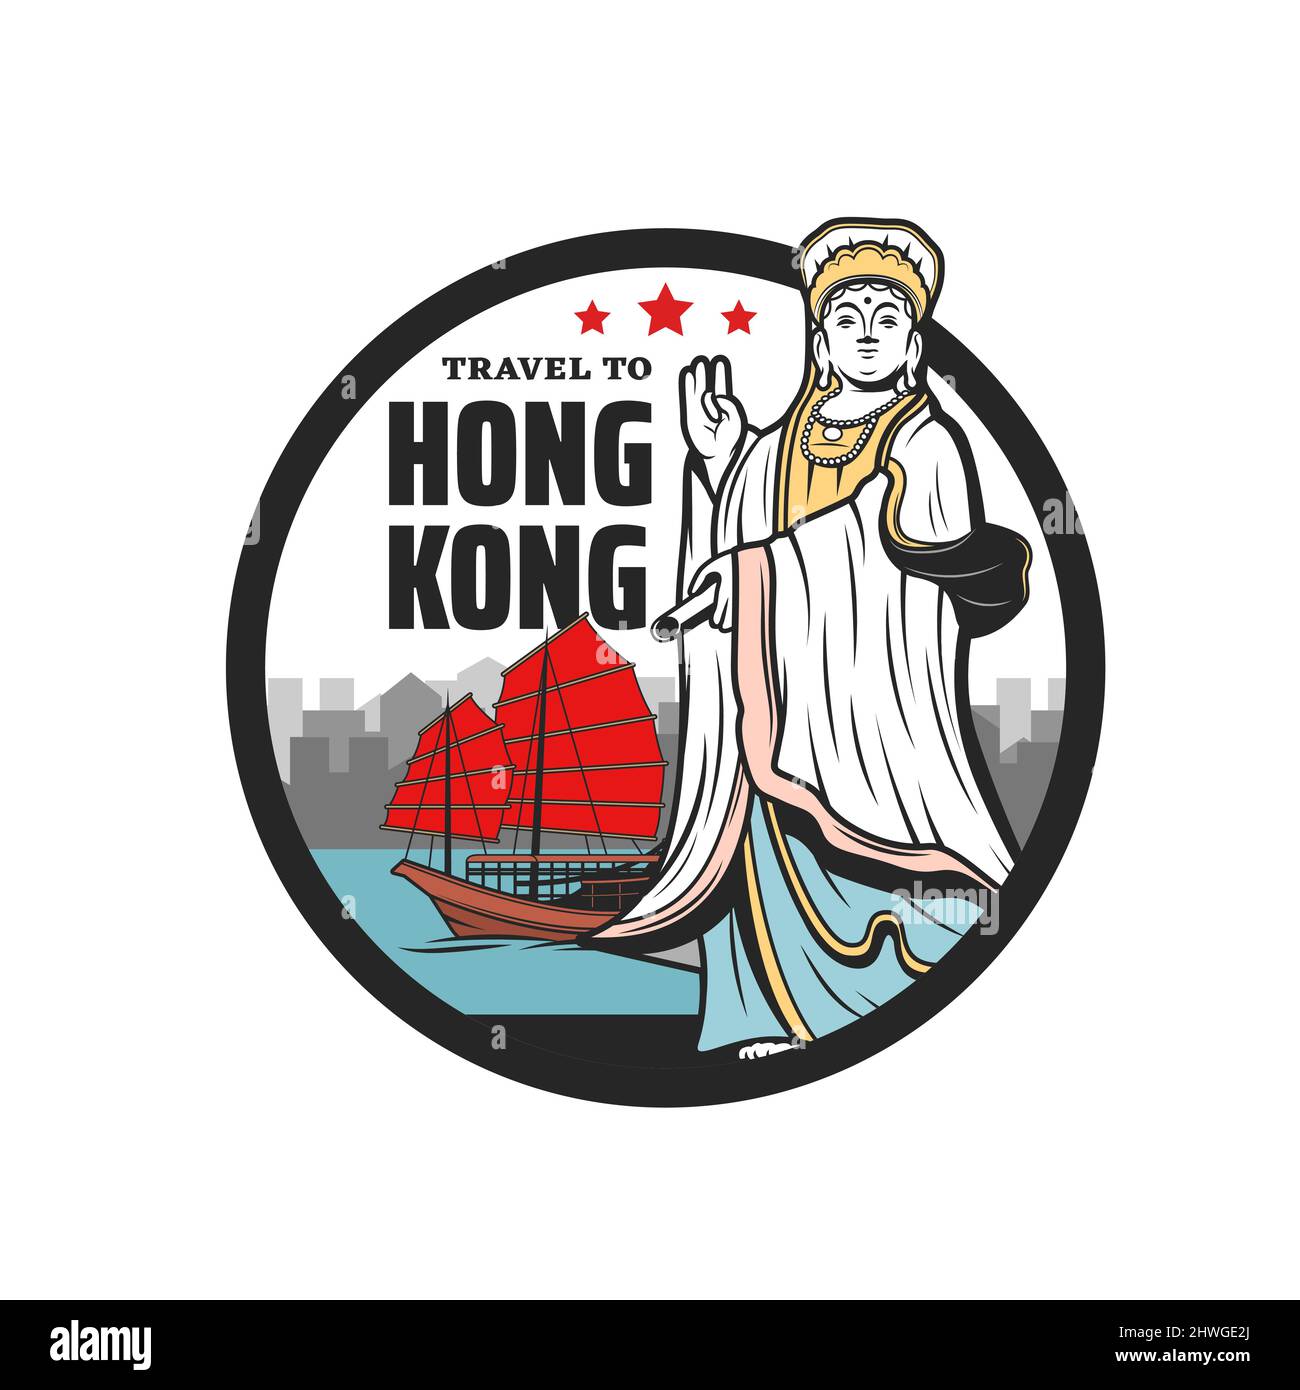 Kuan Yin goddess, Hong Kong travel isolated vector icon. Junk boat with red sail, Victoria harbour skyline and statue of Tin Hau Temple on Repulse bay, Asian tourism and Hong Kong travel tours Stock Vector